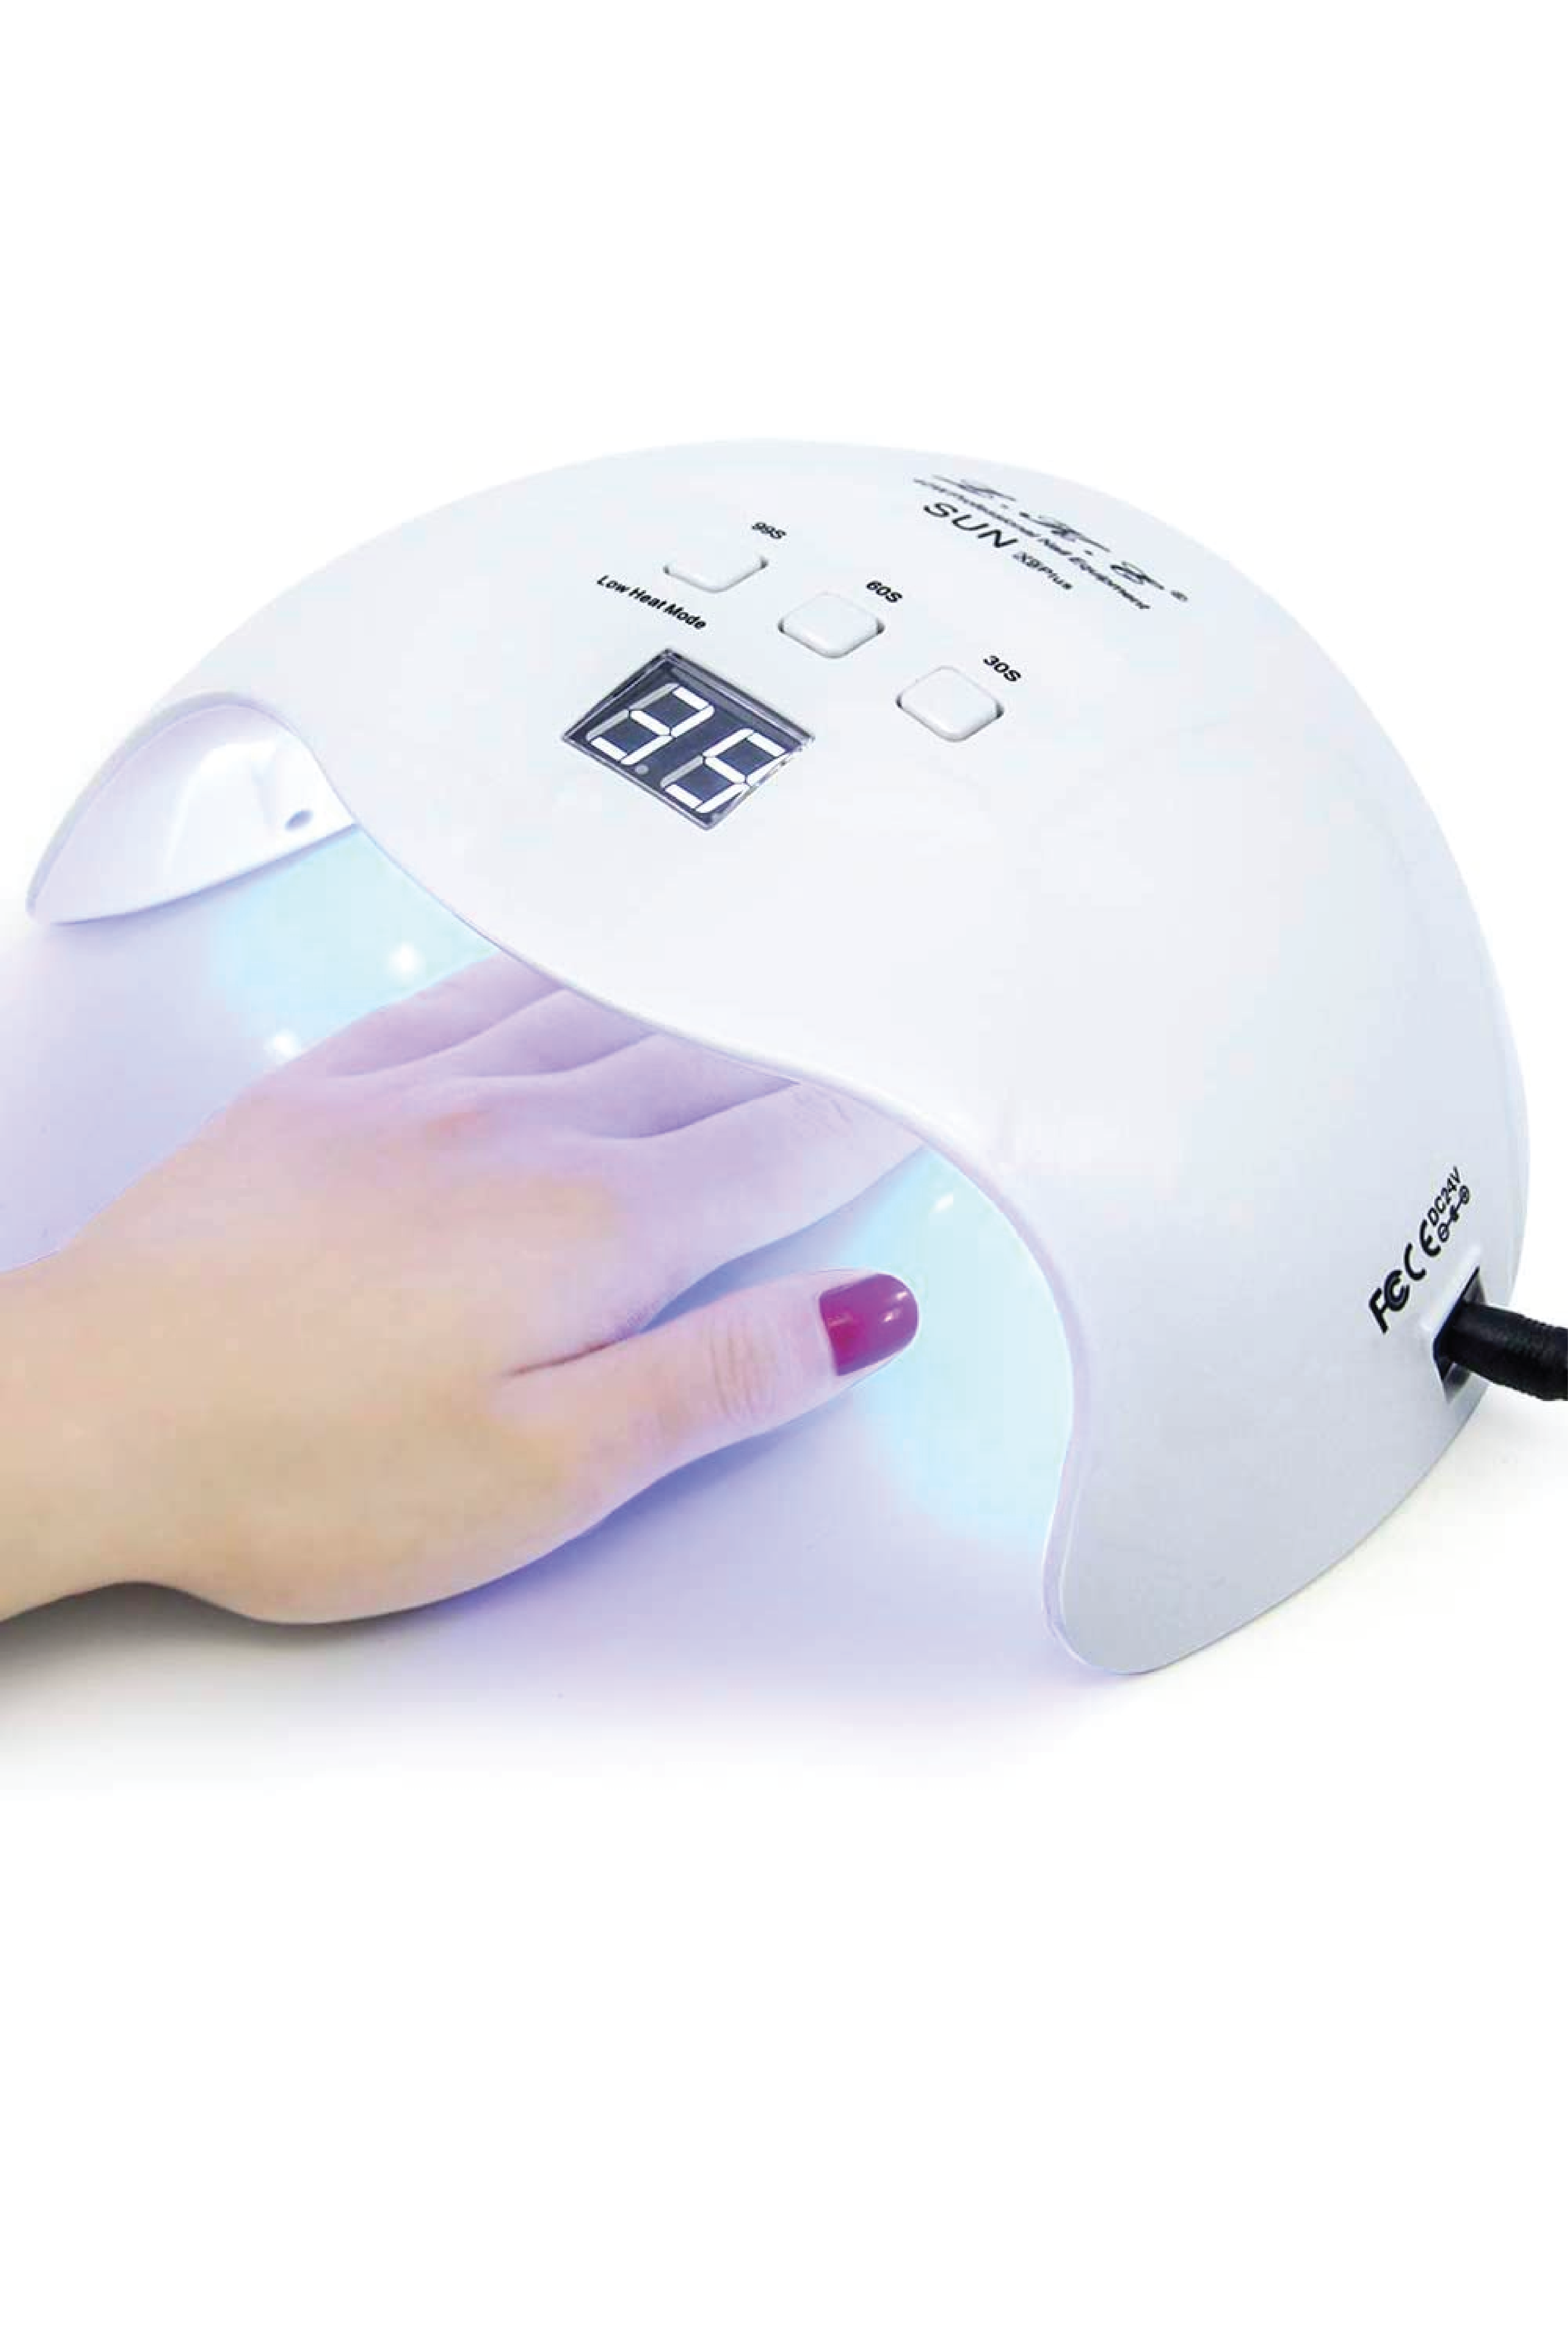 13 Best UV Nail Lamps in 2022 — LED 